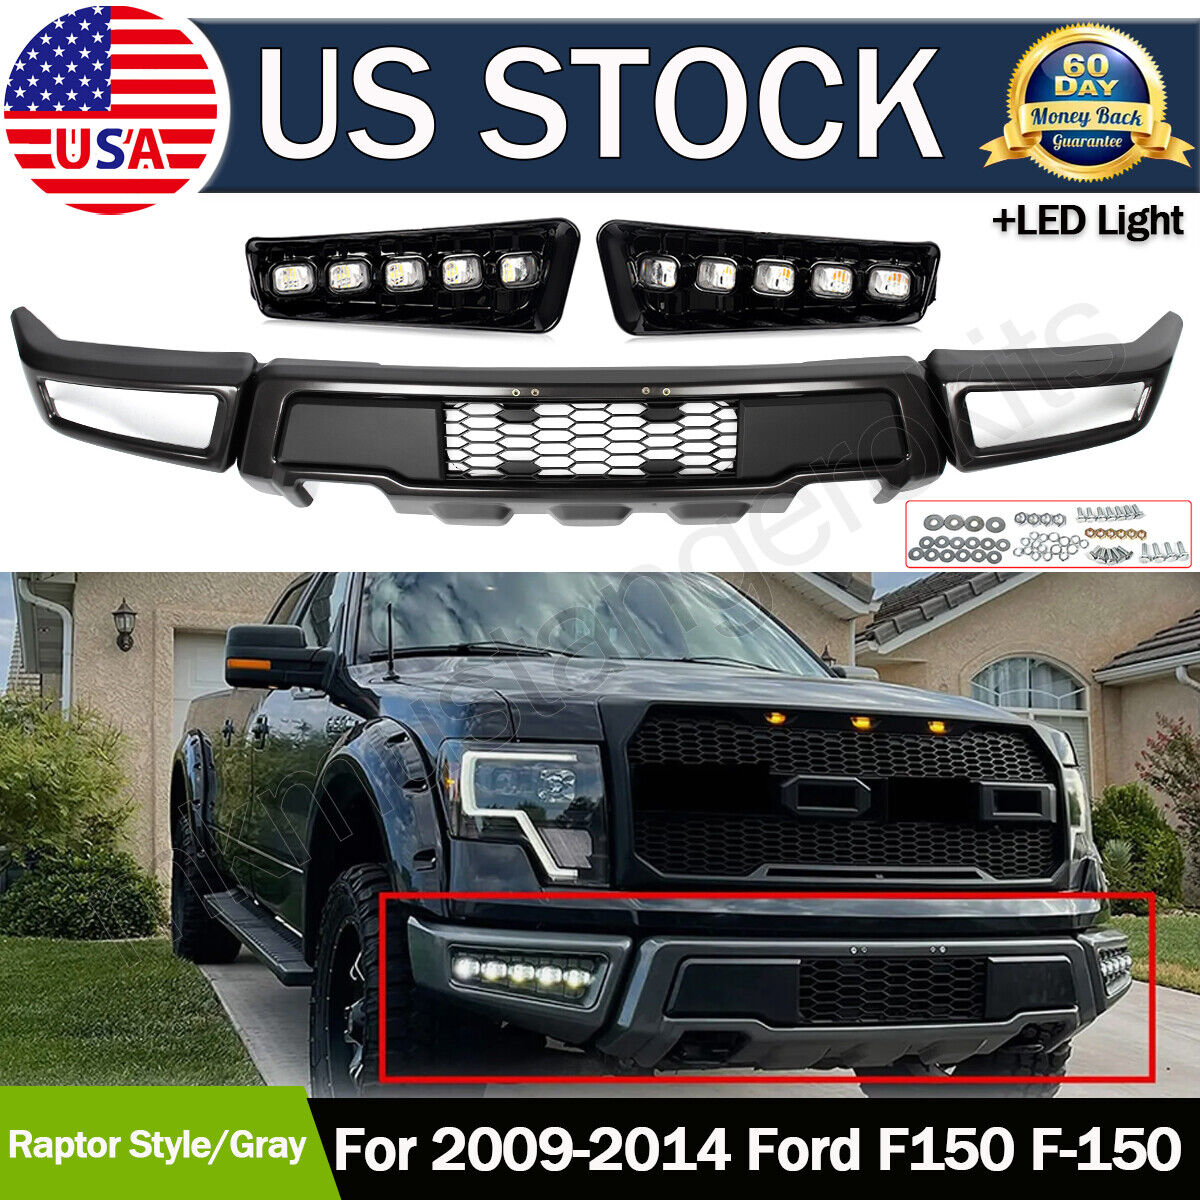 For 09-2014 Ford F150 F-150 Steel Gray Front Bumper Assembly w/LED Raptor Style